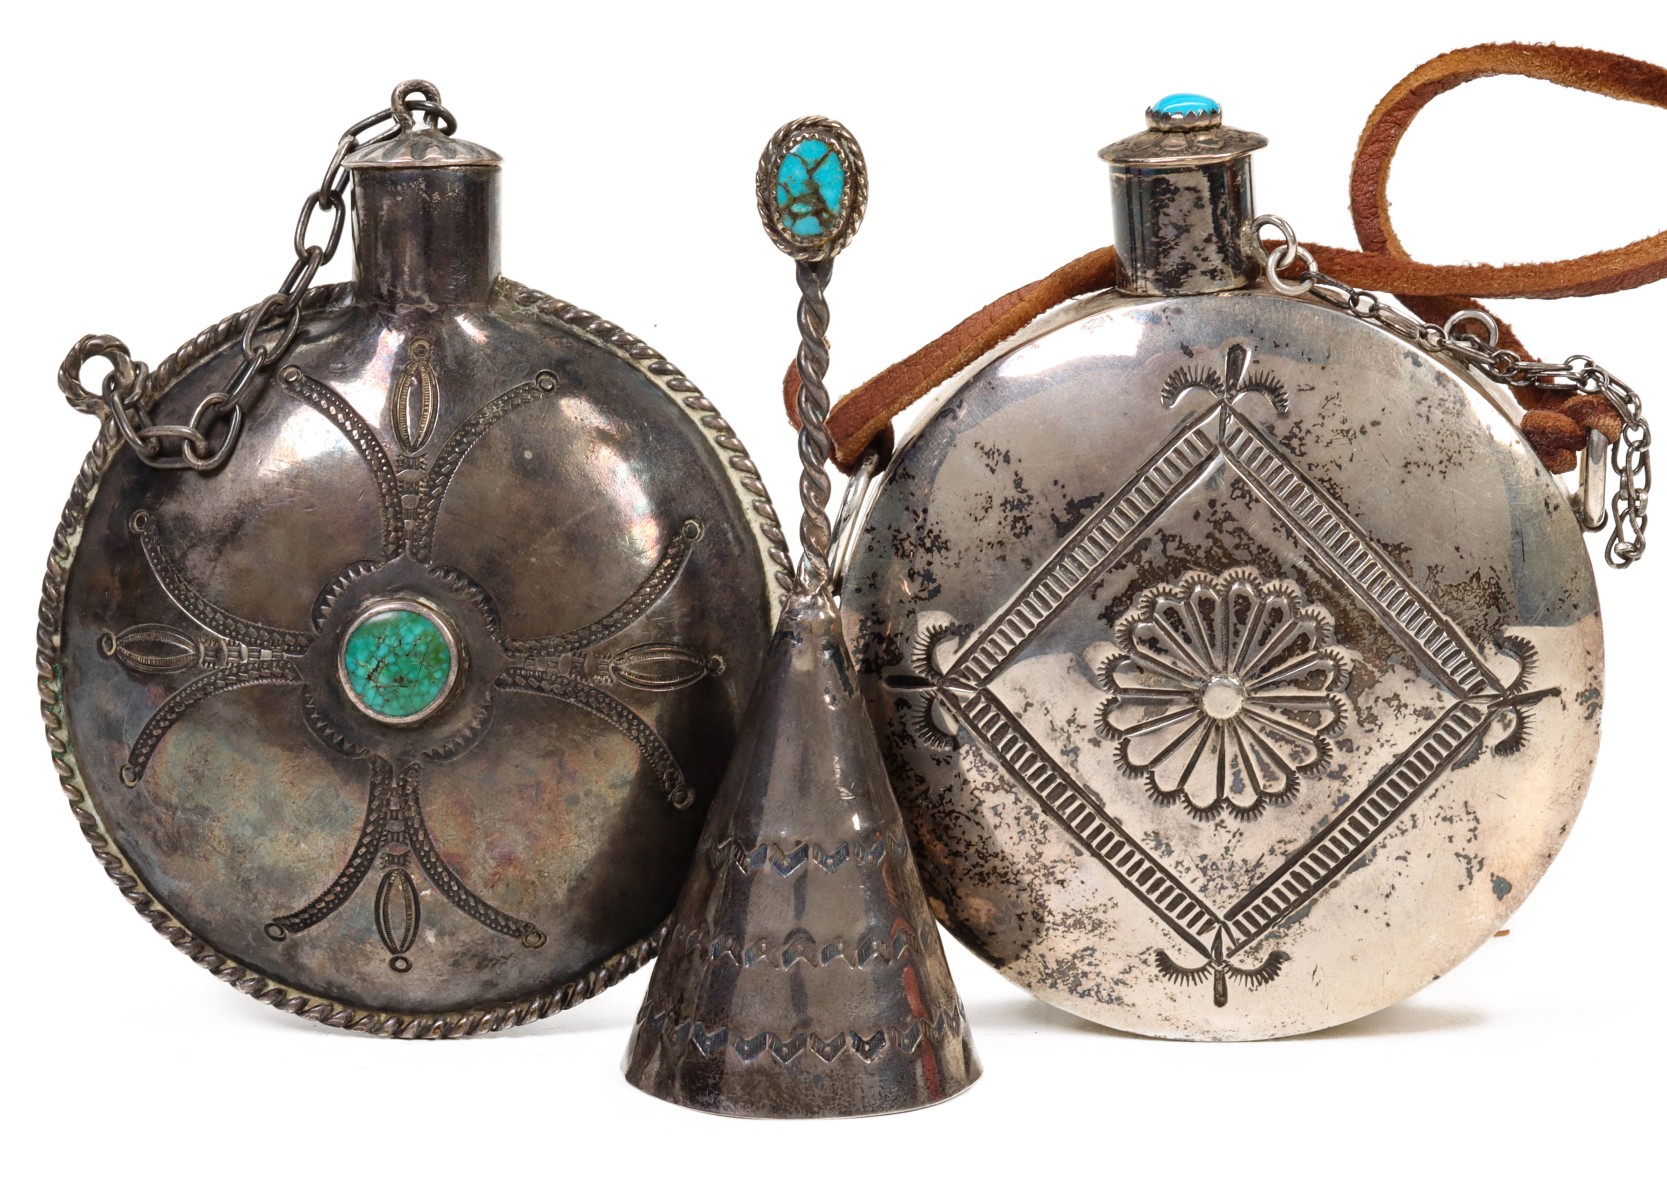 NAVAJO STERLING SILVER OBJECTS WITH STAMPED DECORATION